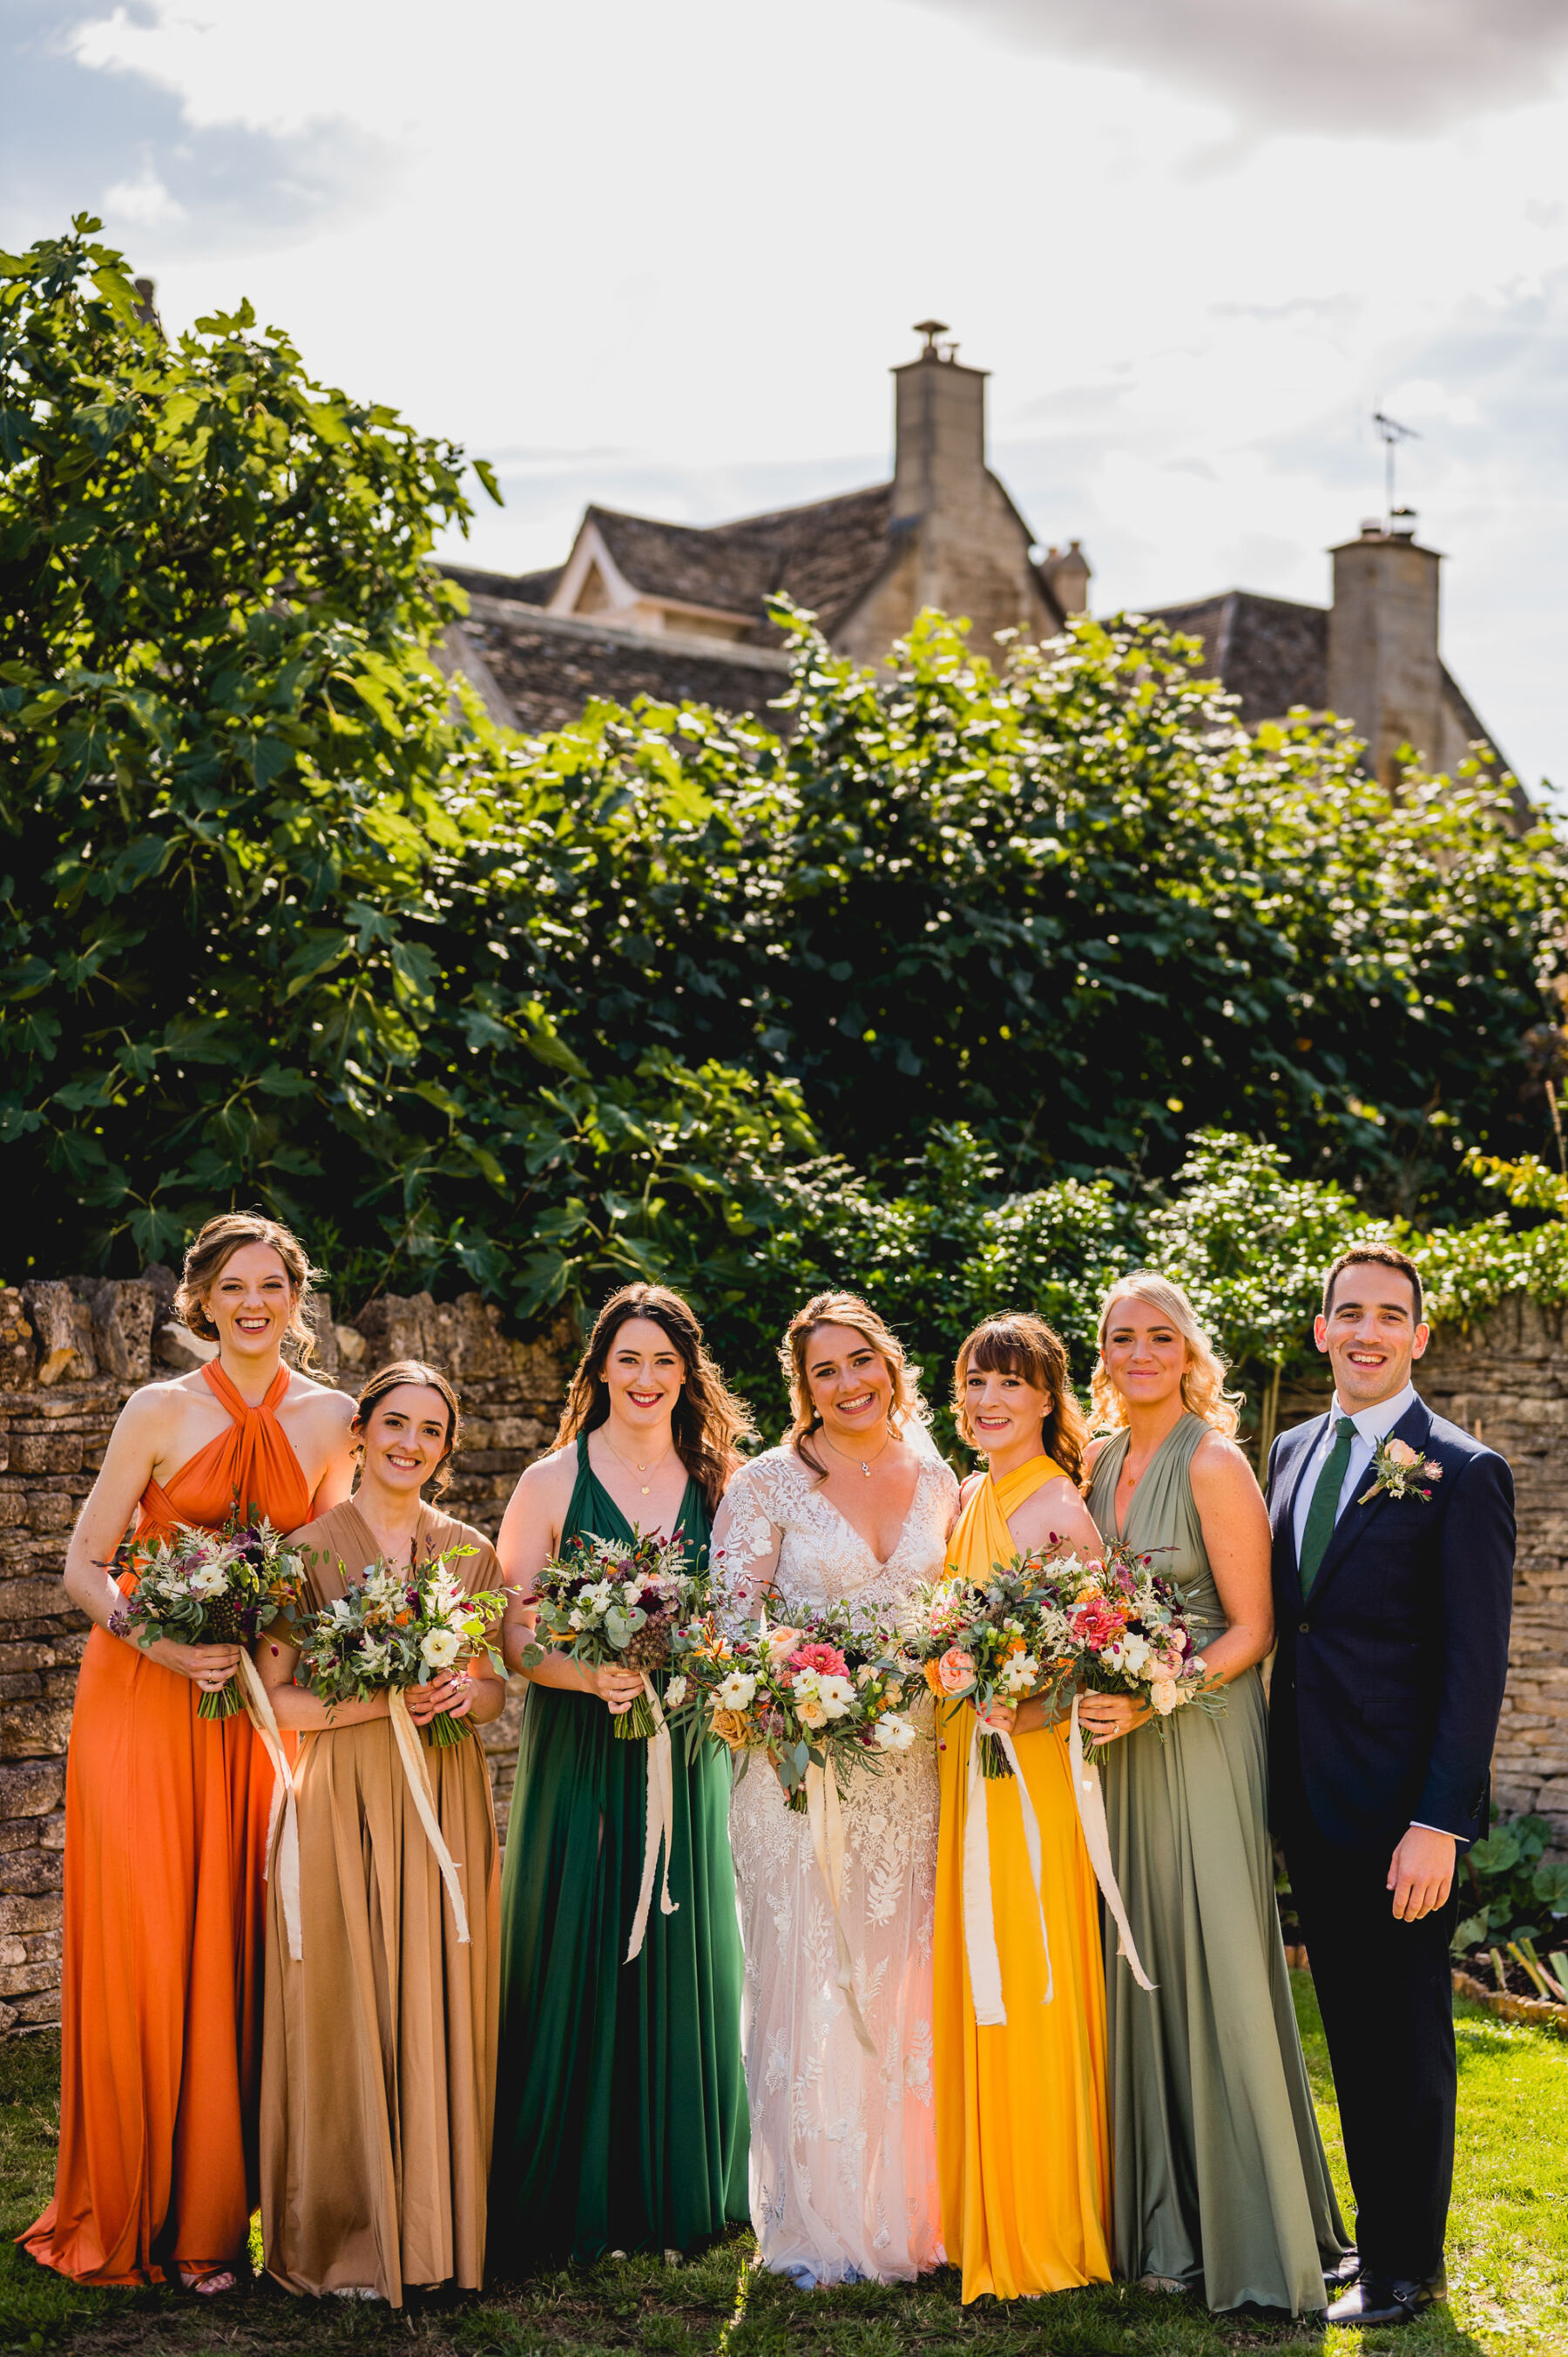 Bridesmaids in colourful dresses